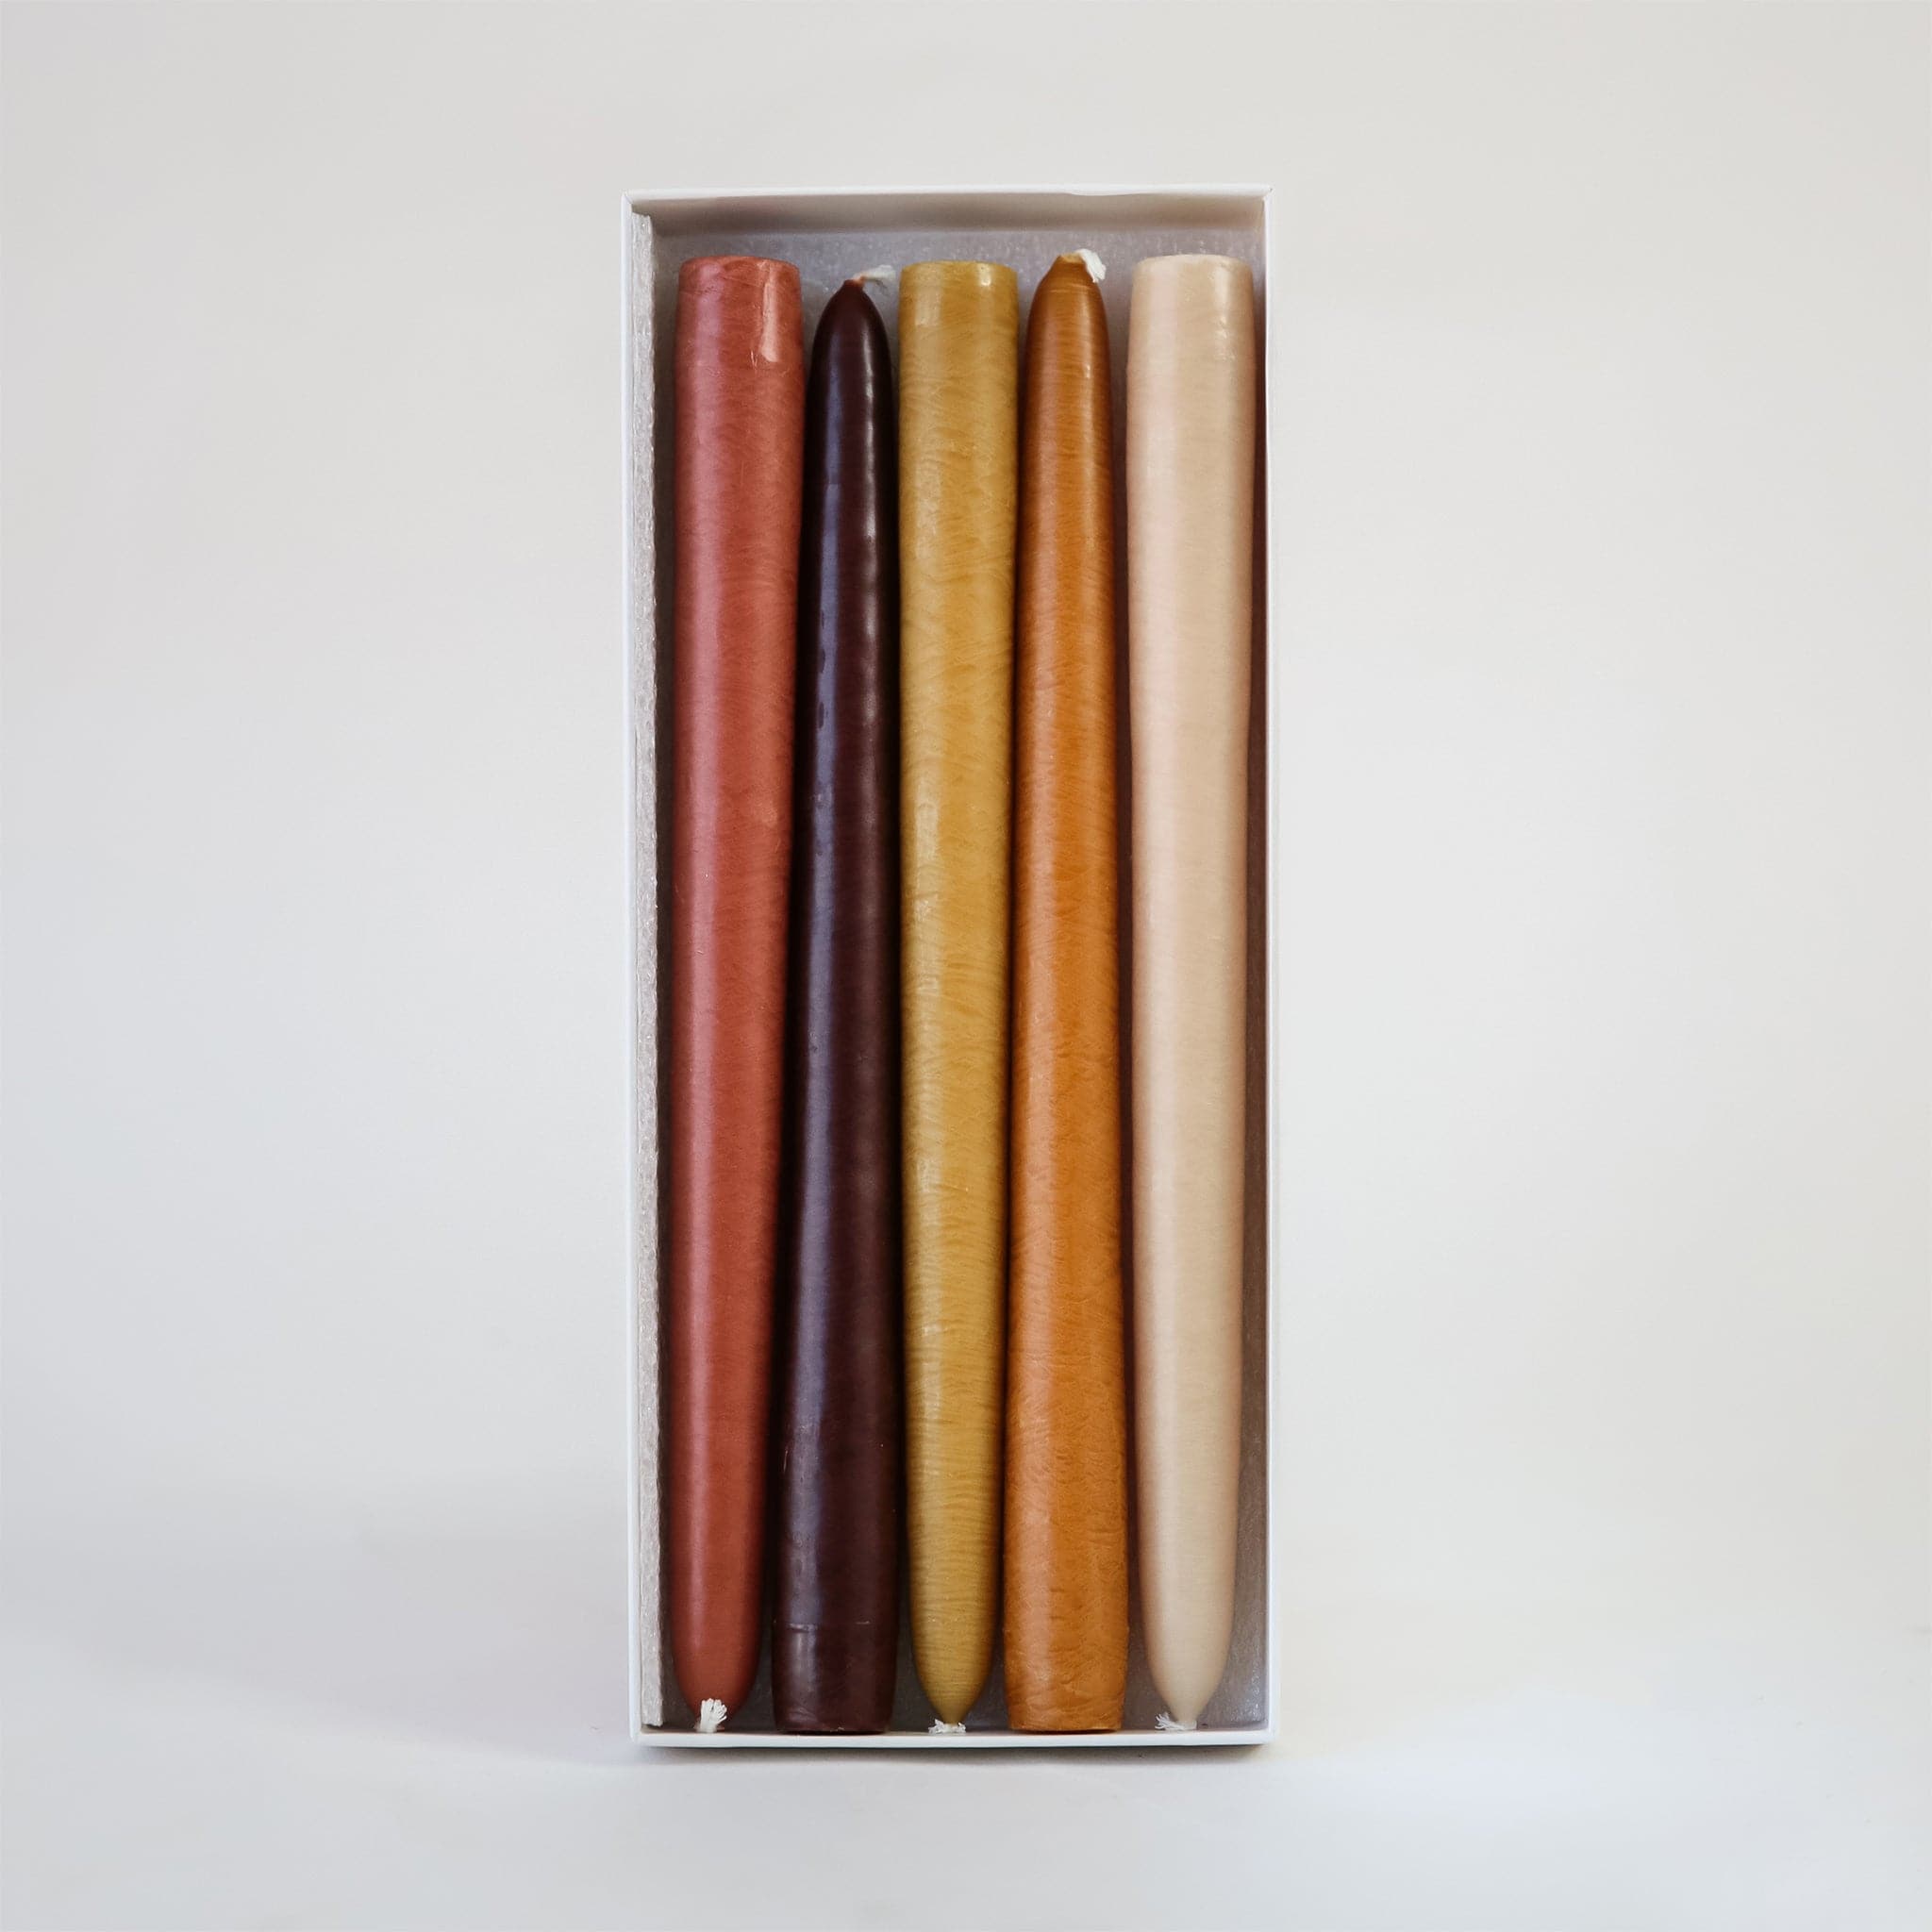 Set of 5 deep warm natural colored 10 inch candles positioned in open white box against white background. 